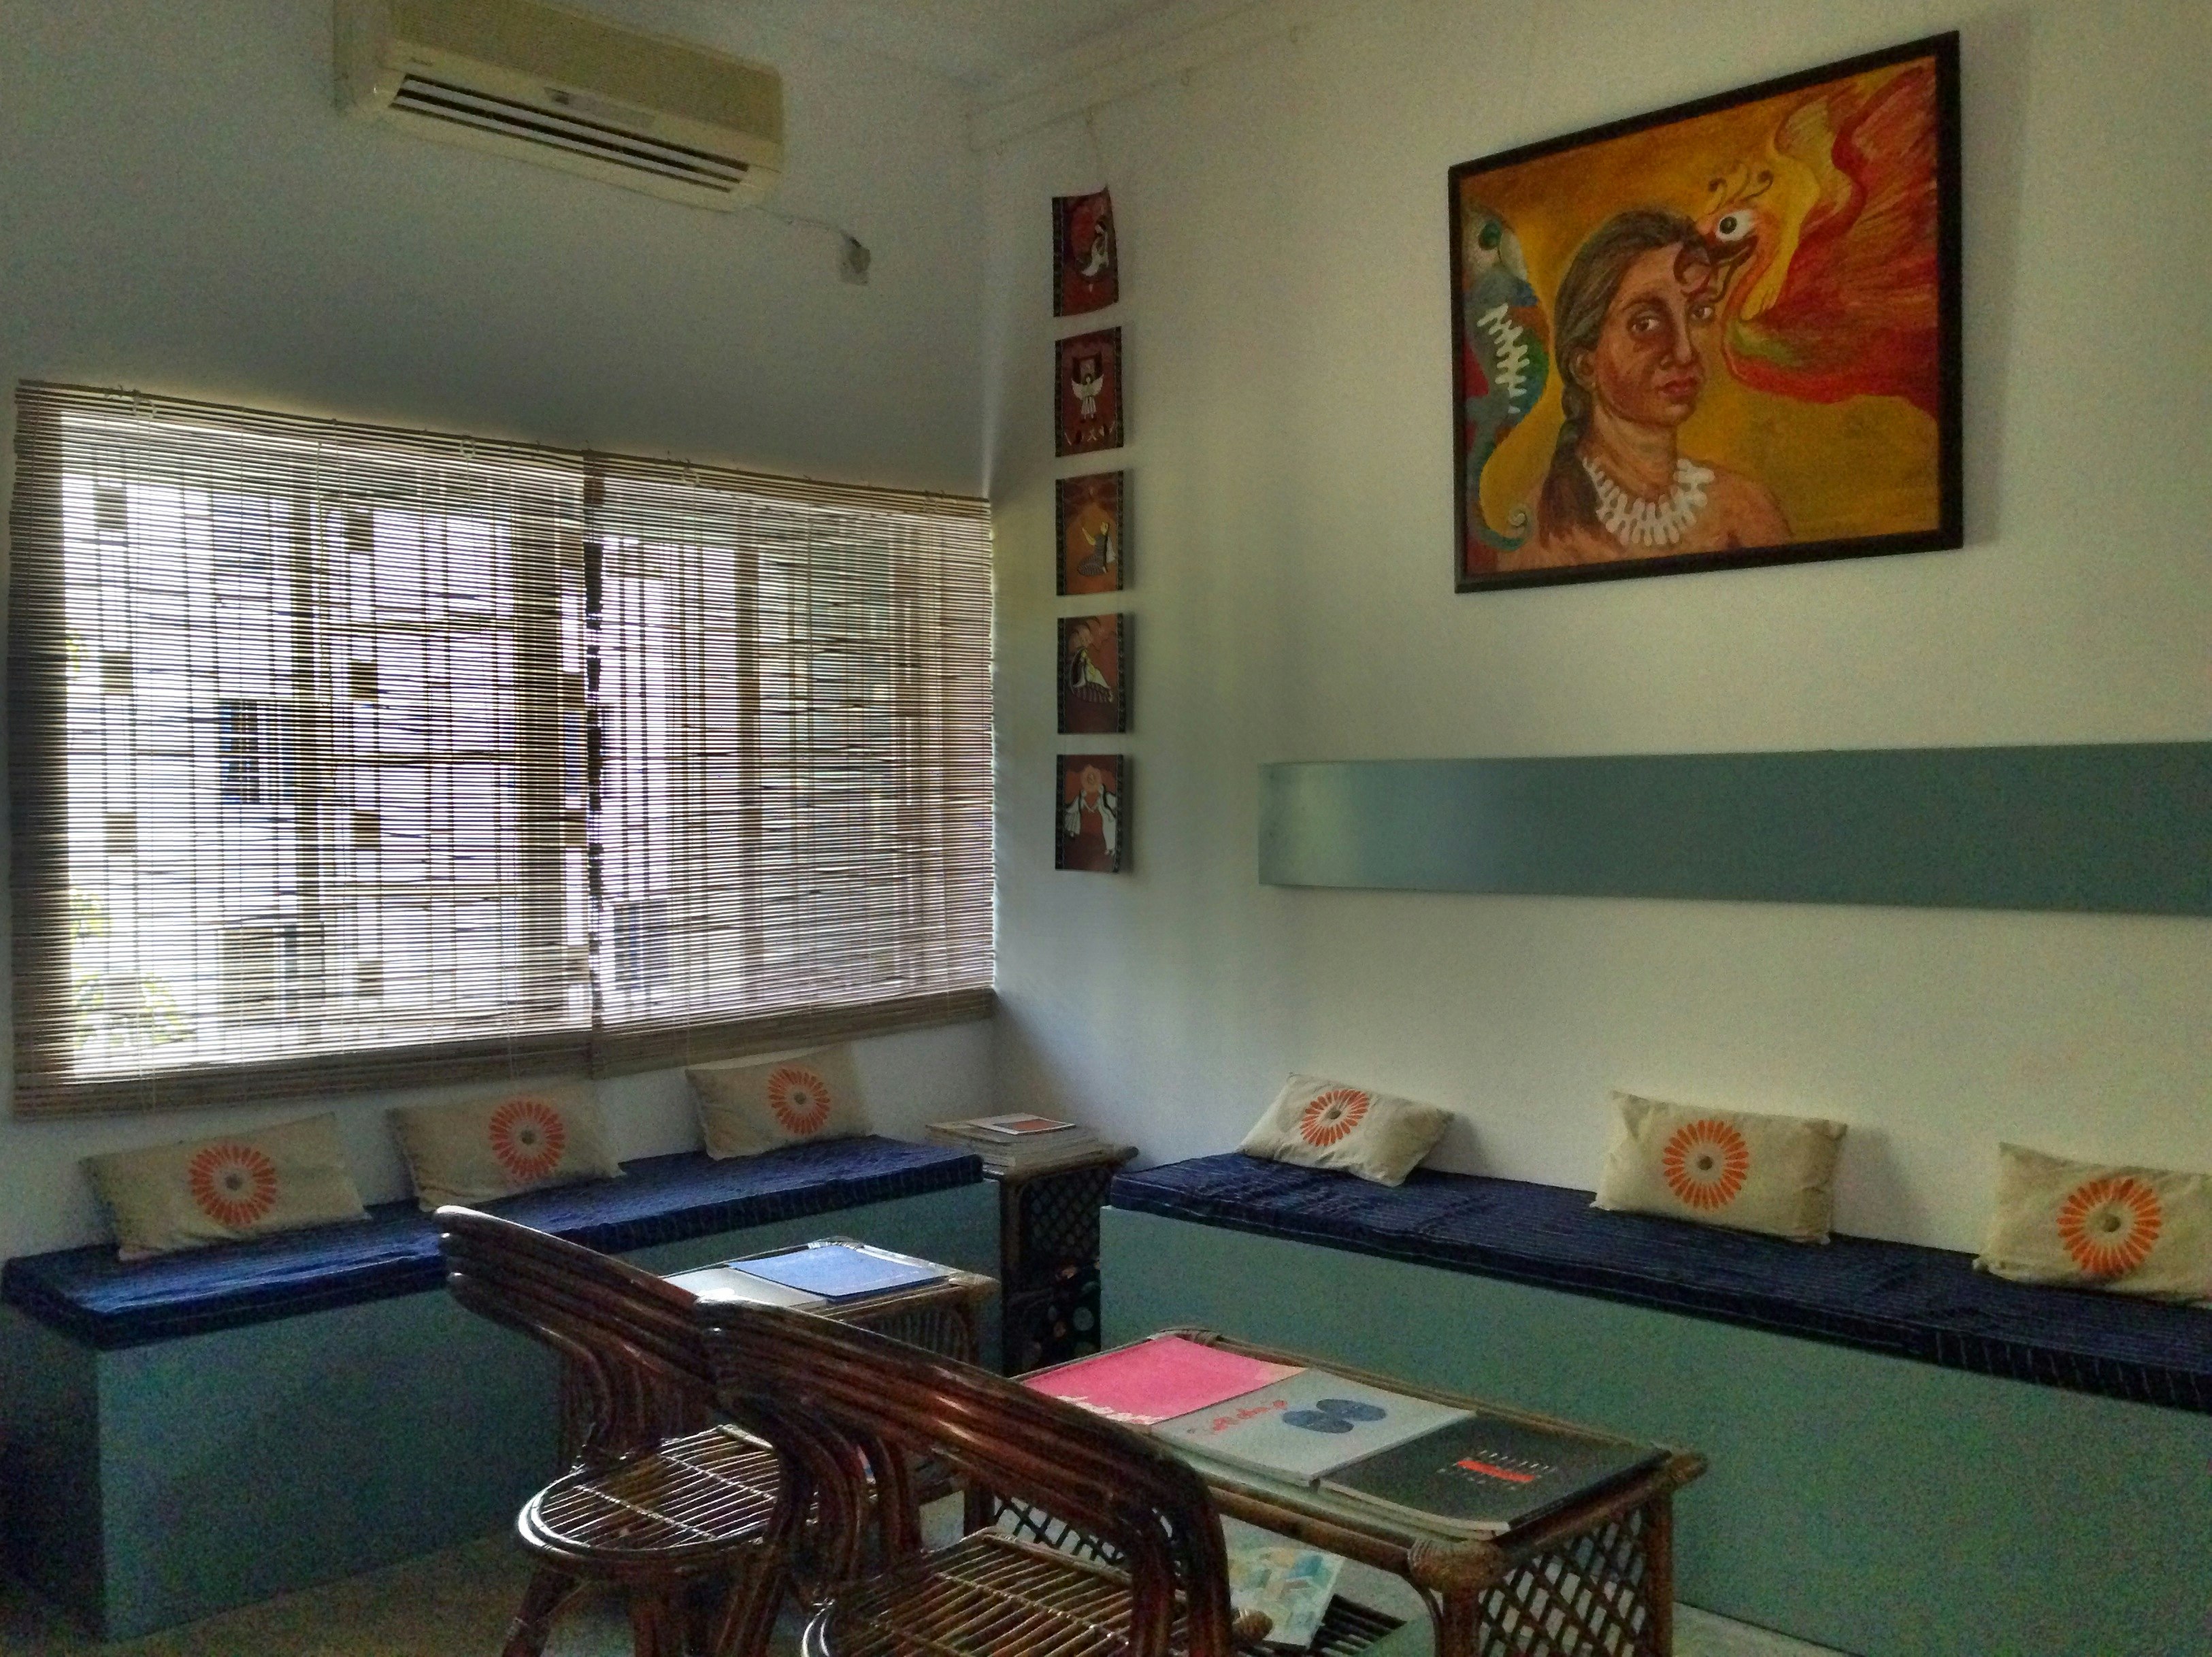 Two cushioned benches in a corner of the arts complex, facing some wooden chairs and coffee tables with art books spread on them. On the wall is a painting of a brown-skinned female-presenting figure staring out with a red flamingo next to her.